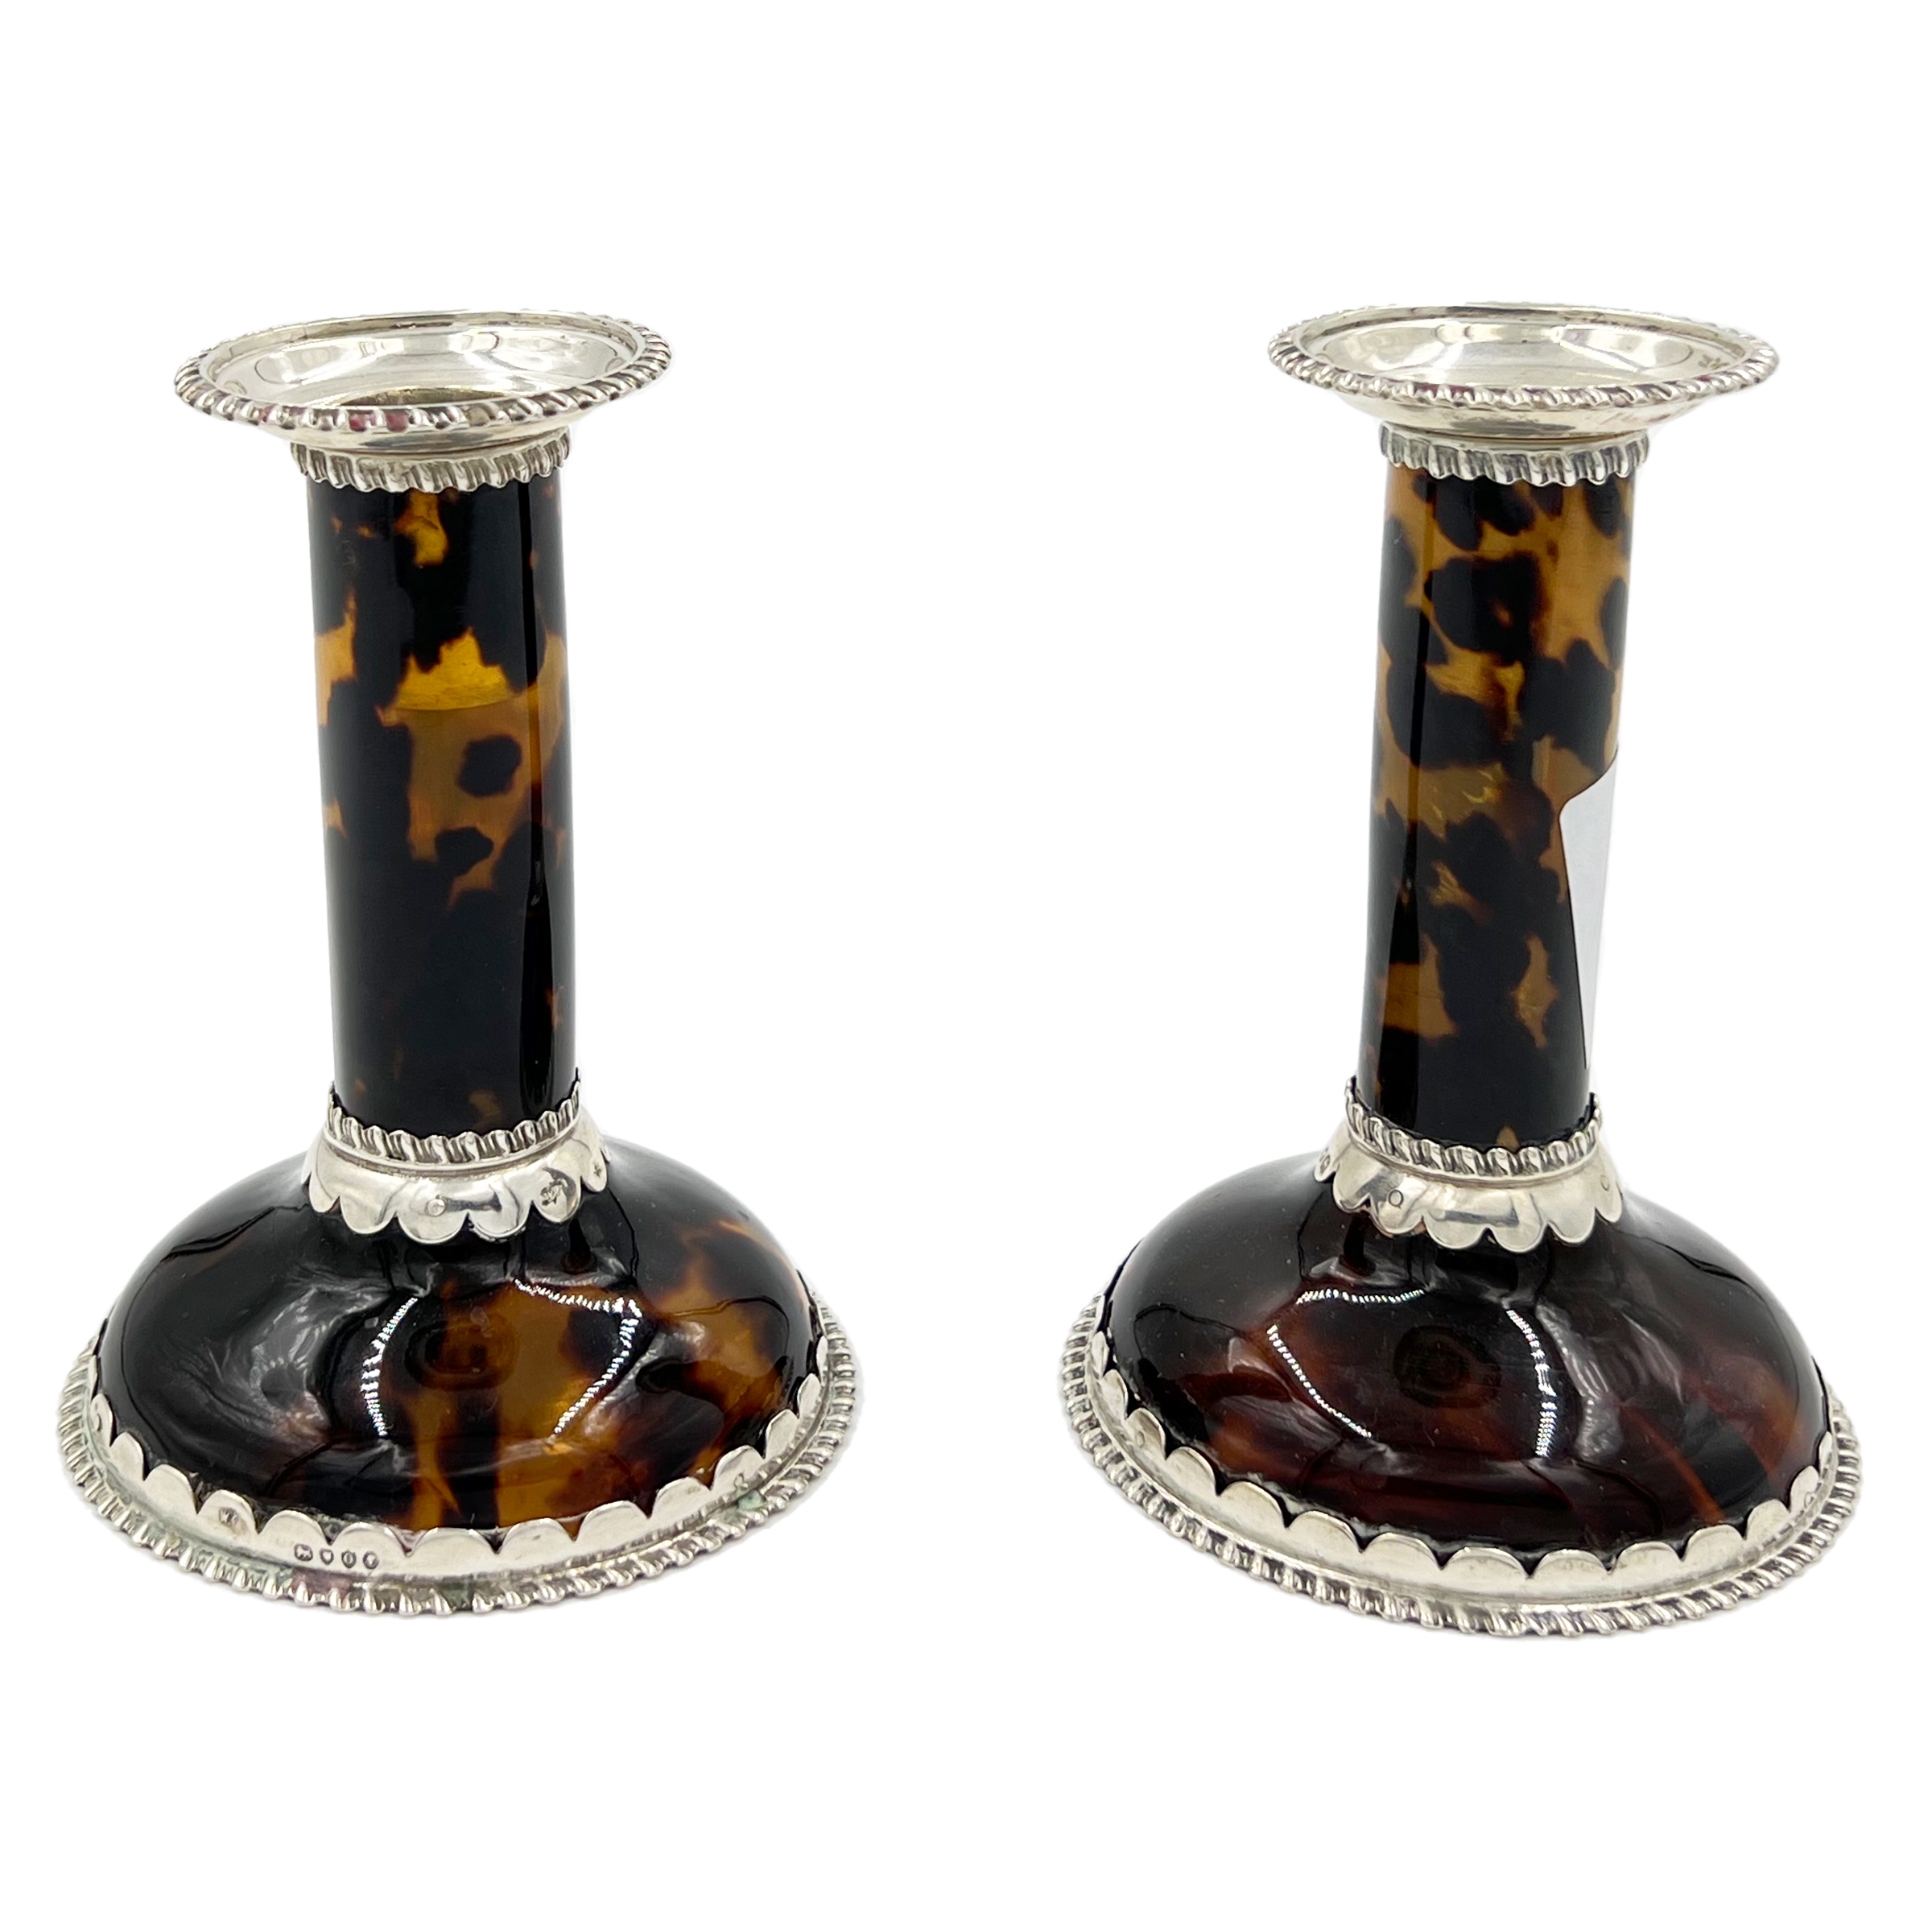 A FINE PAIR OF SILVER MOUNTED TORTOISESHELL CANDLESTICKS, LONDON, WILLIAM COMYNS, 1889